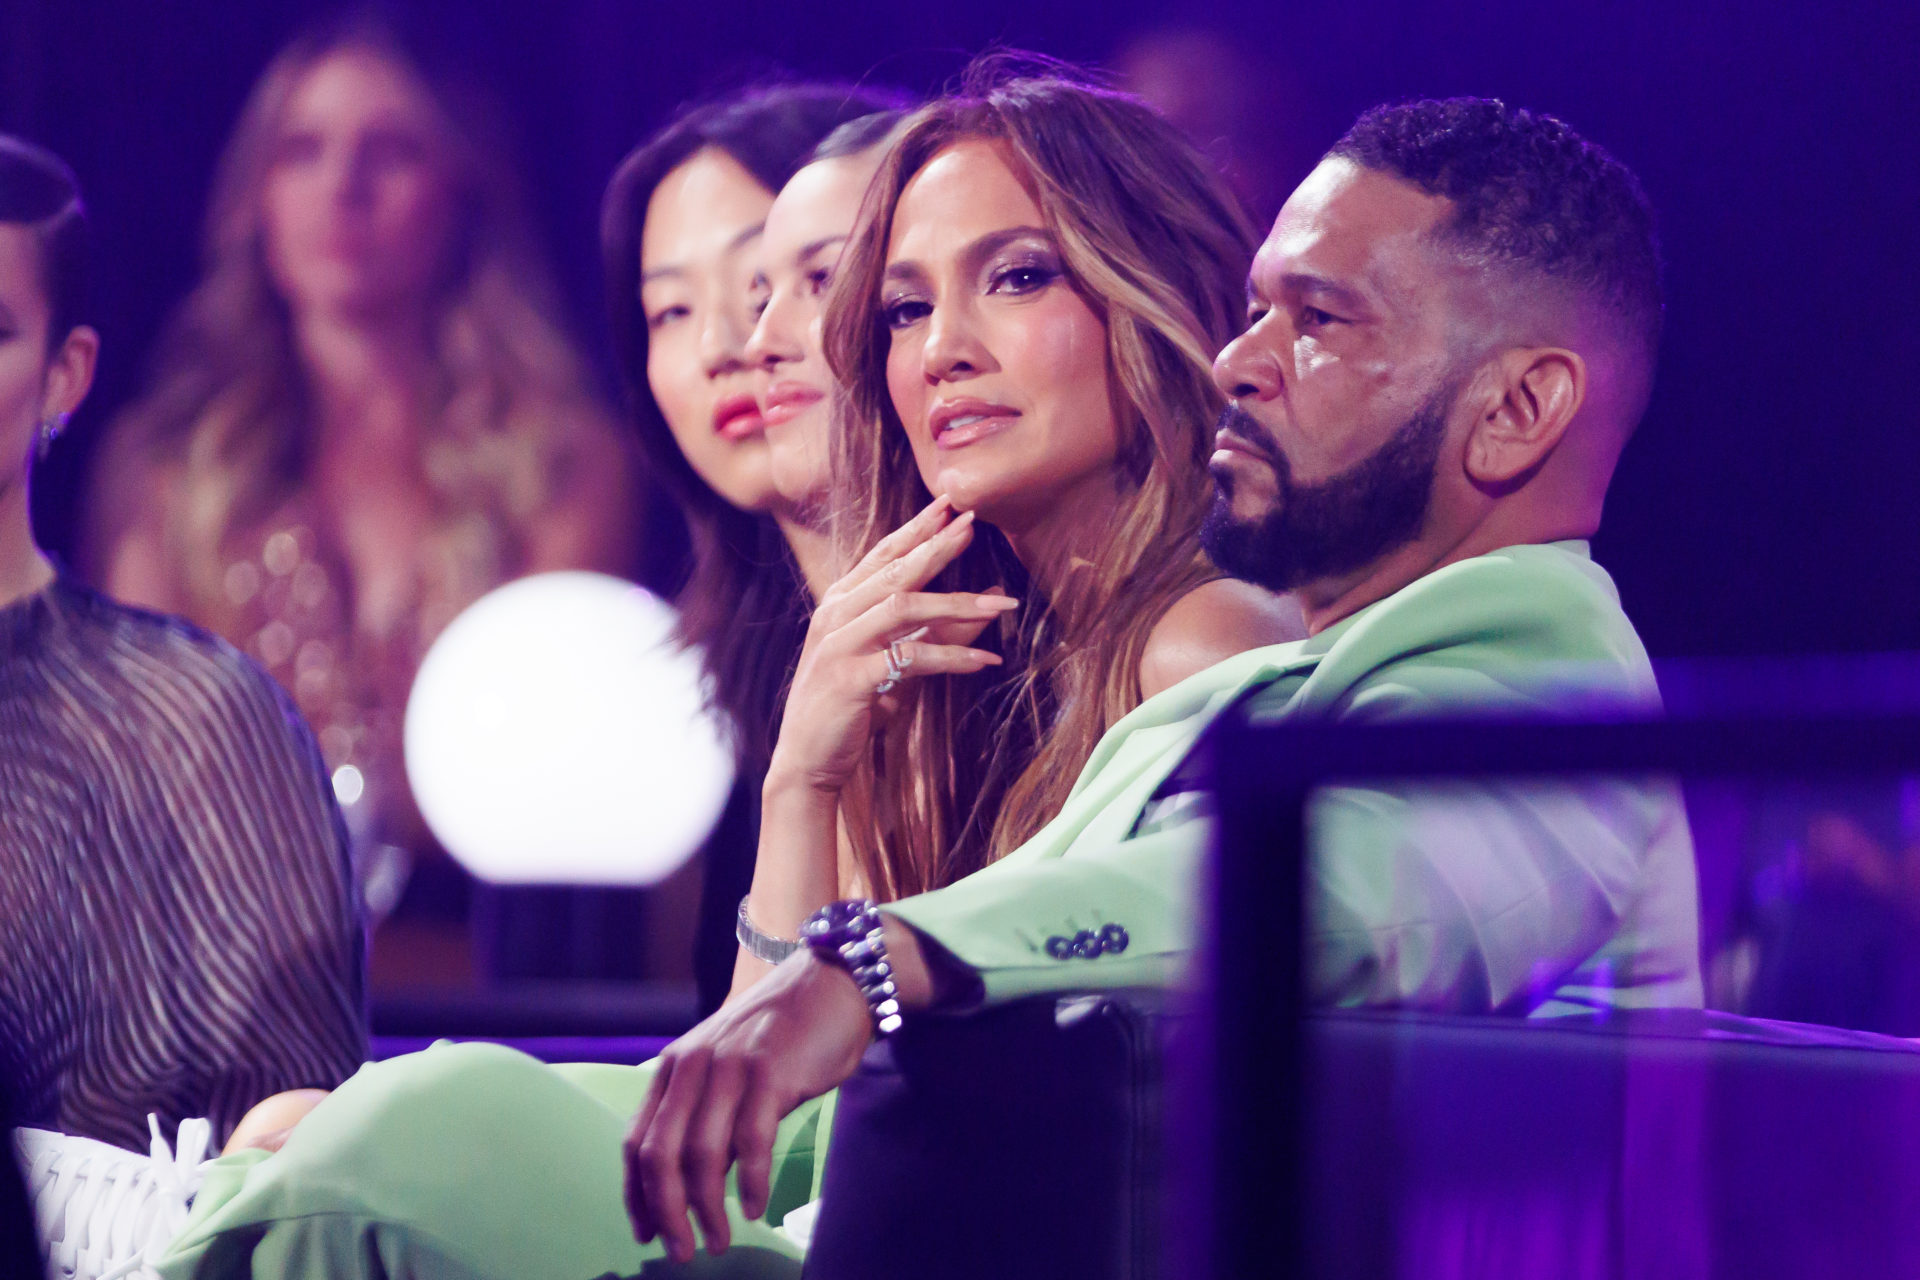 Benny Medina helping J-Lo 'On Her Way' made him a total millionaire